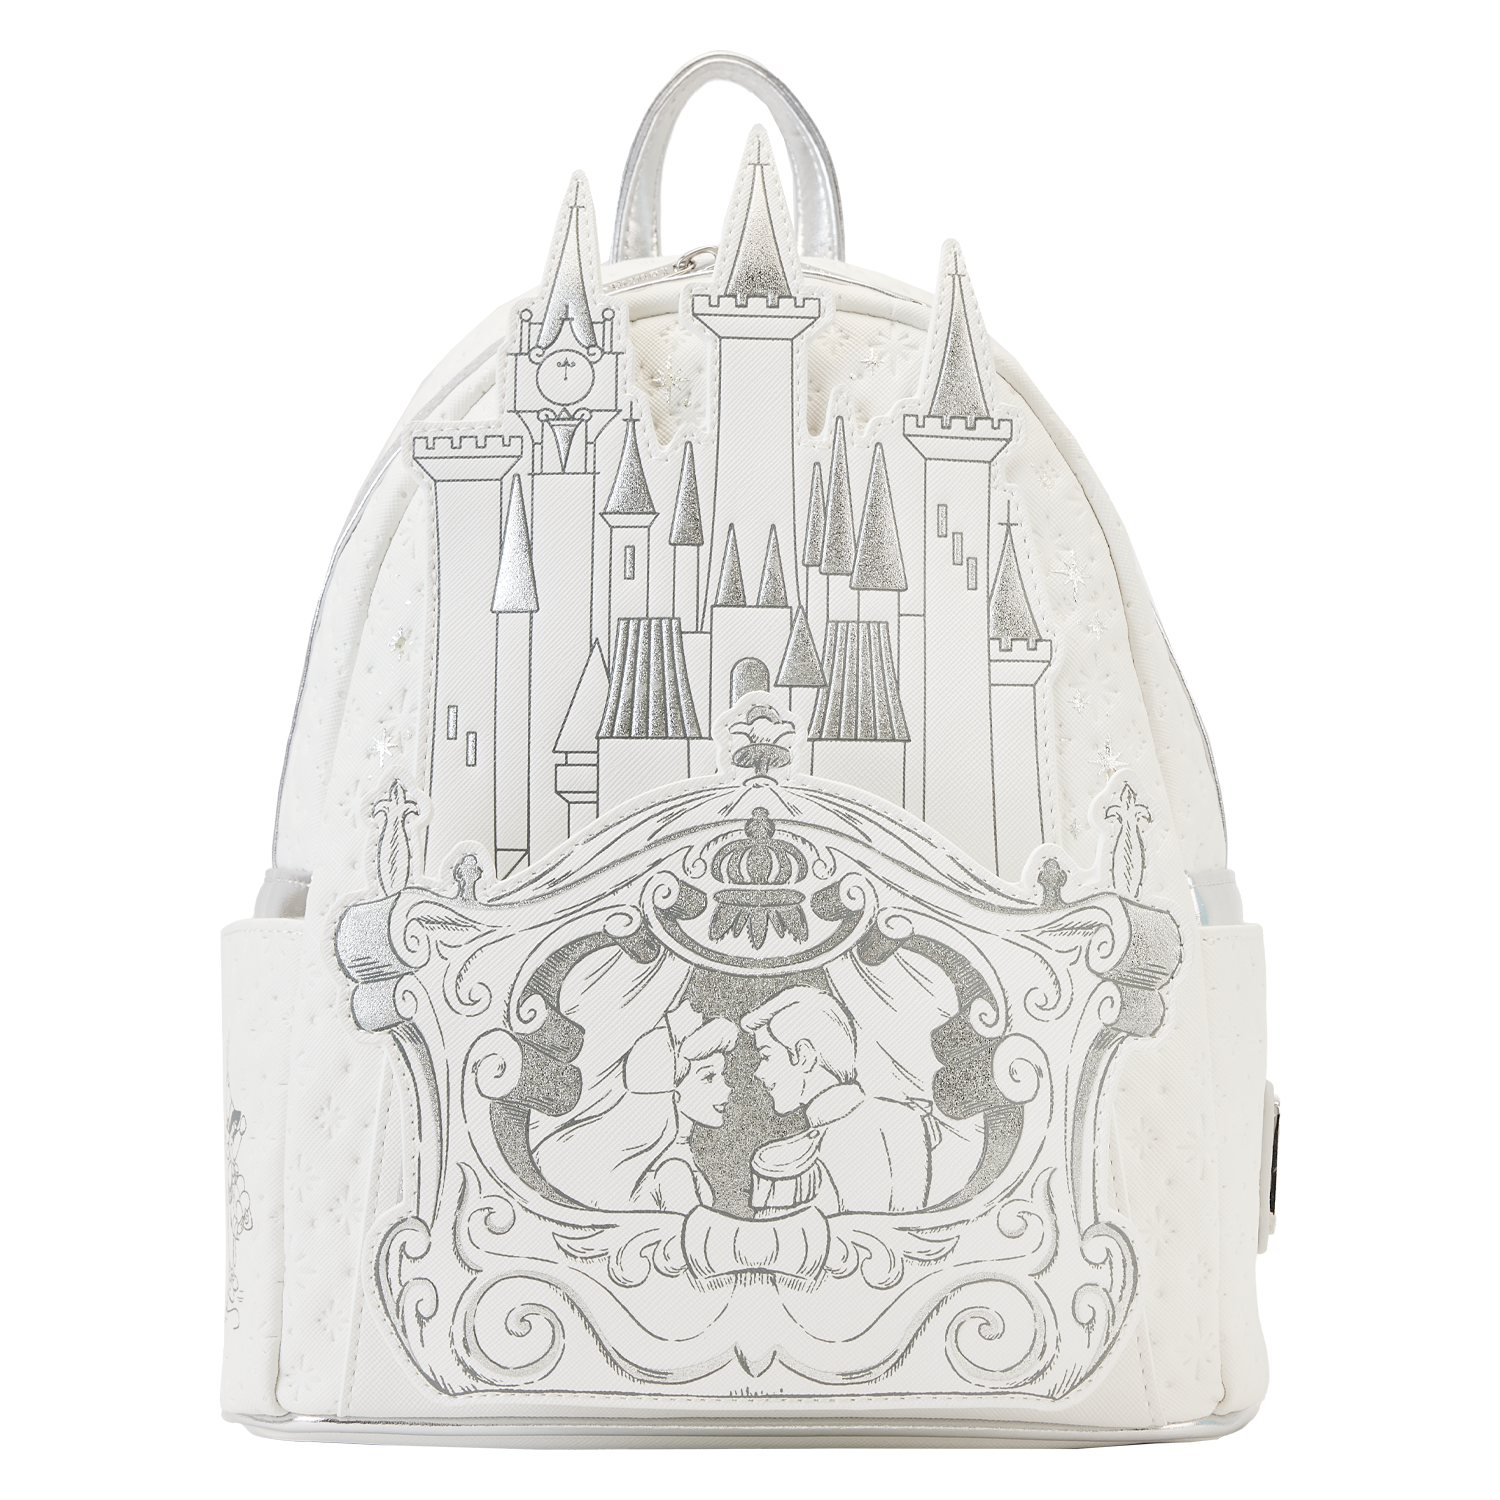 Loungefly X Disney Cinderella Happily Ever After Crossbody Bag WDTB2794